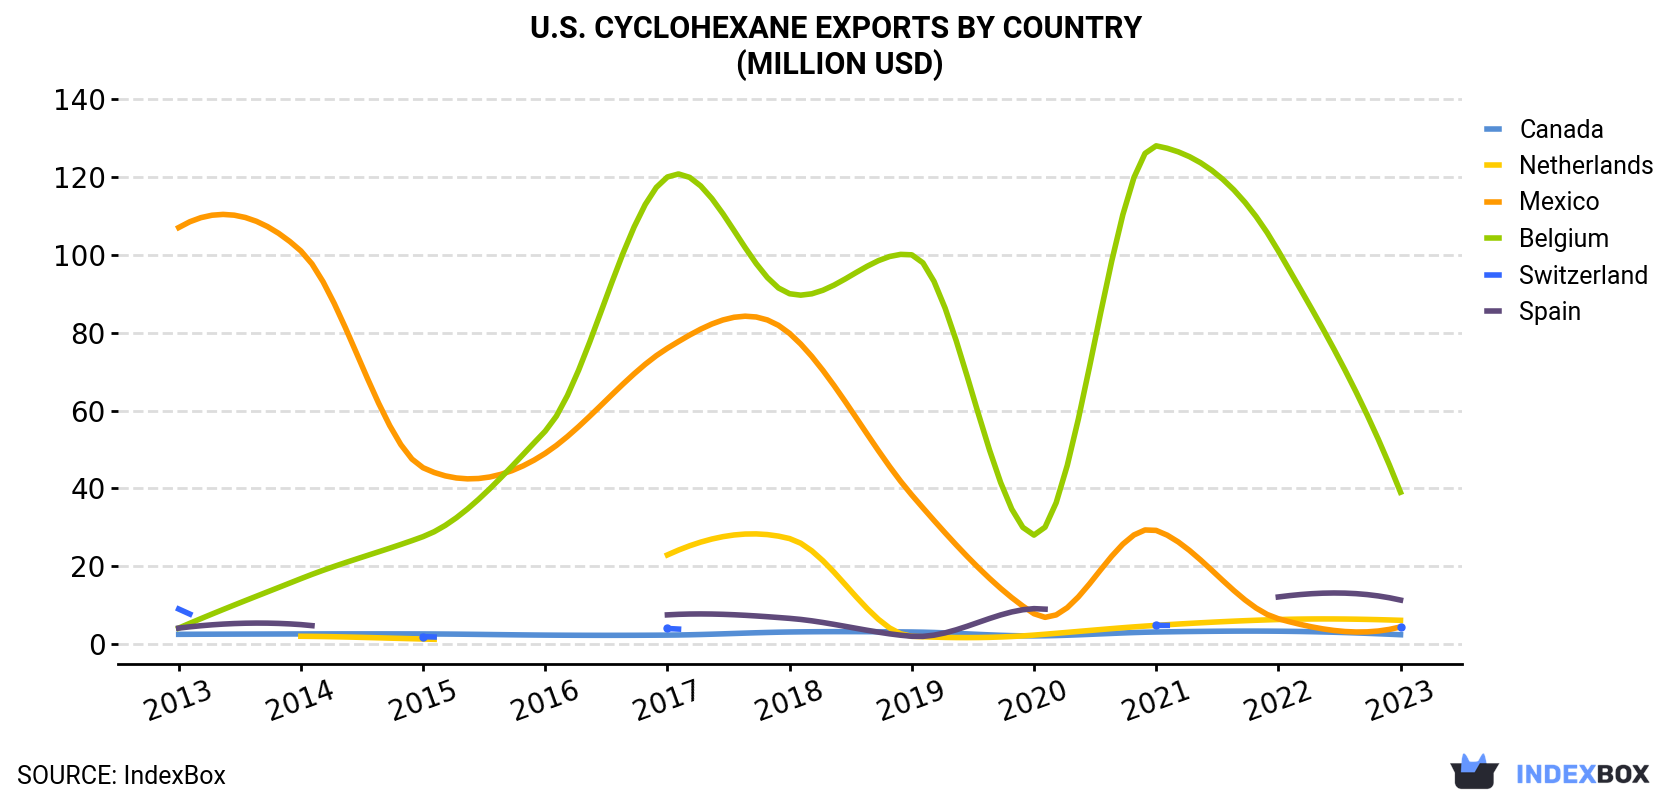 U.S. Cyclohexane Exports By Country (Million USD)